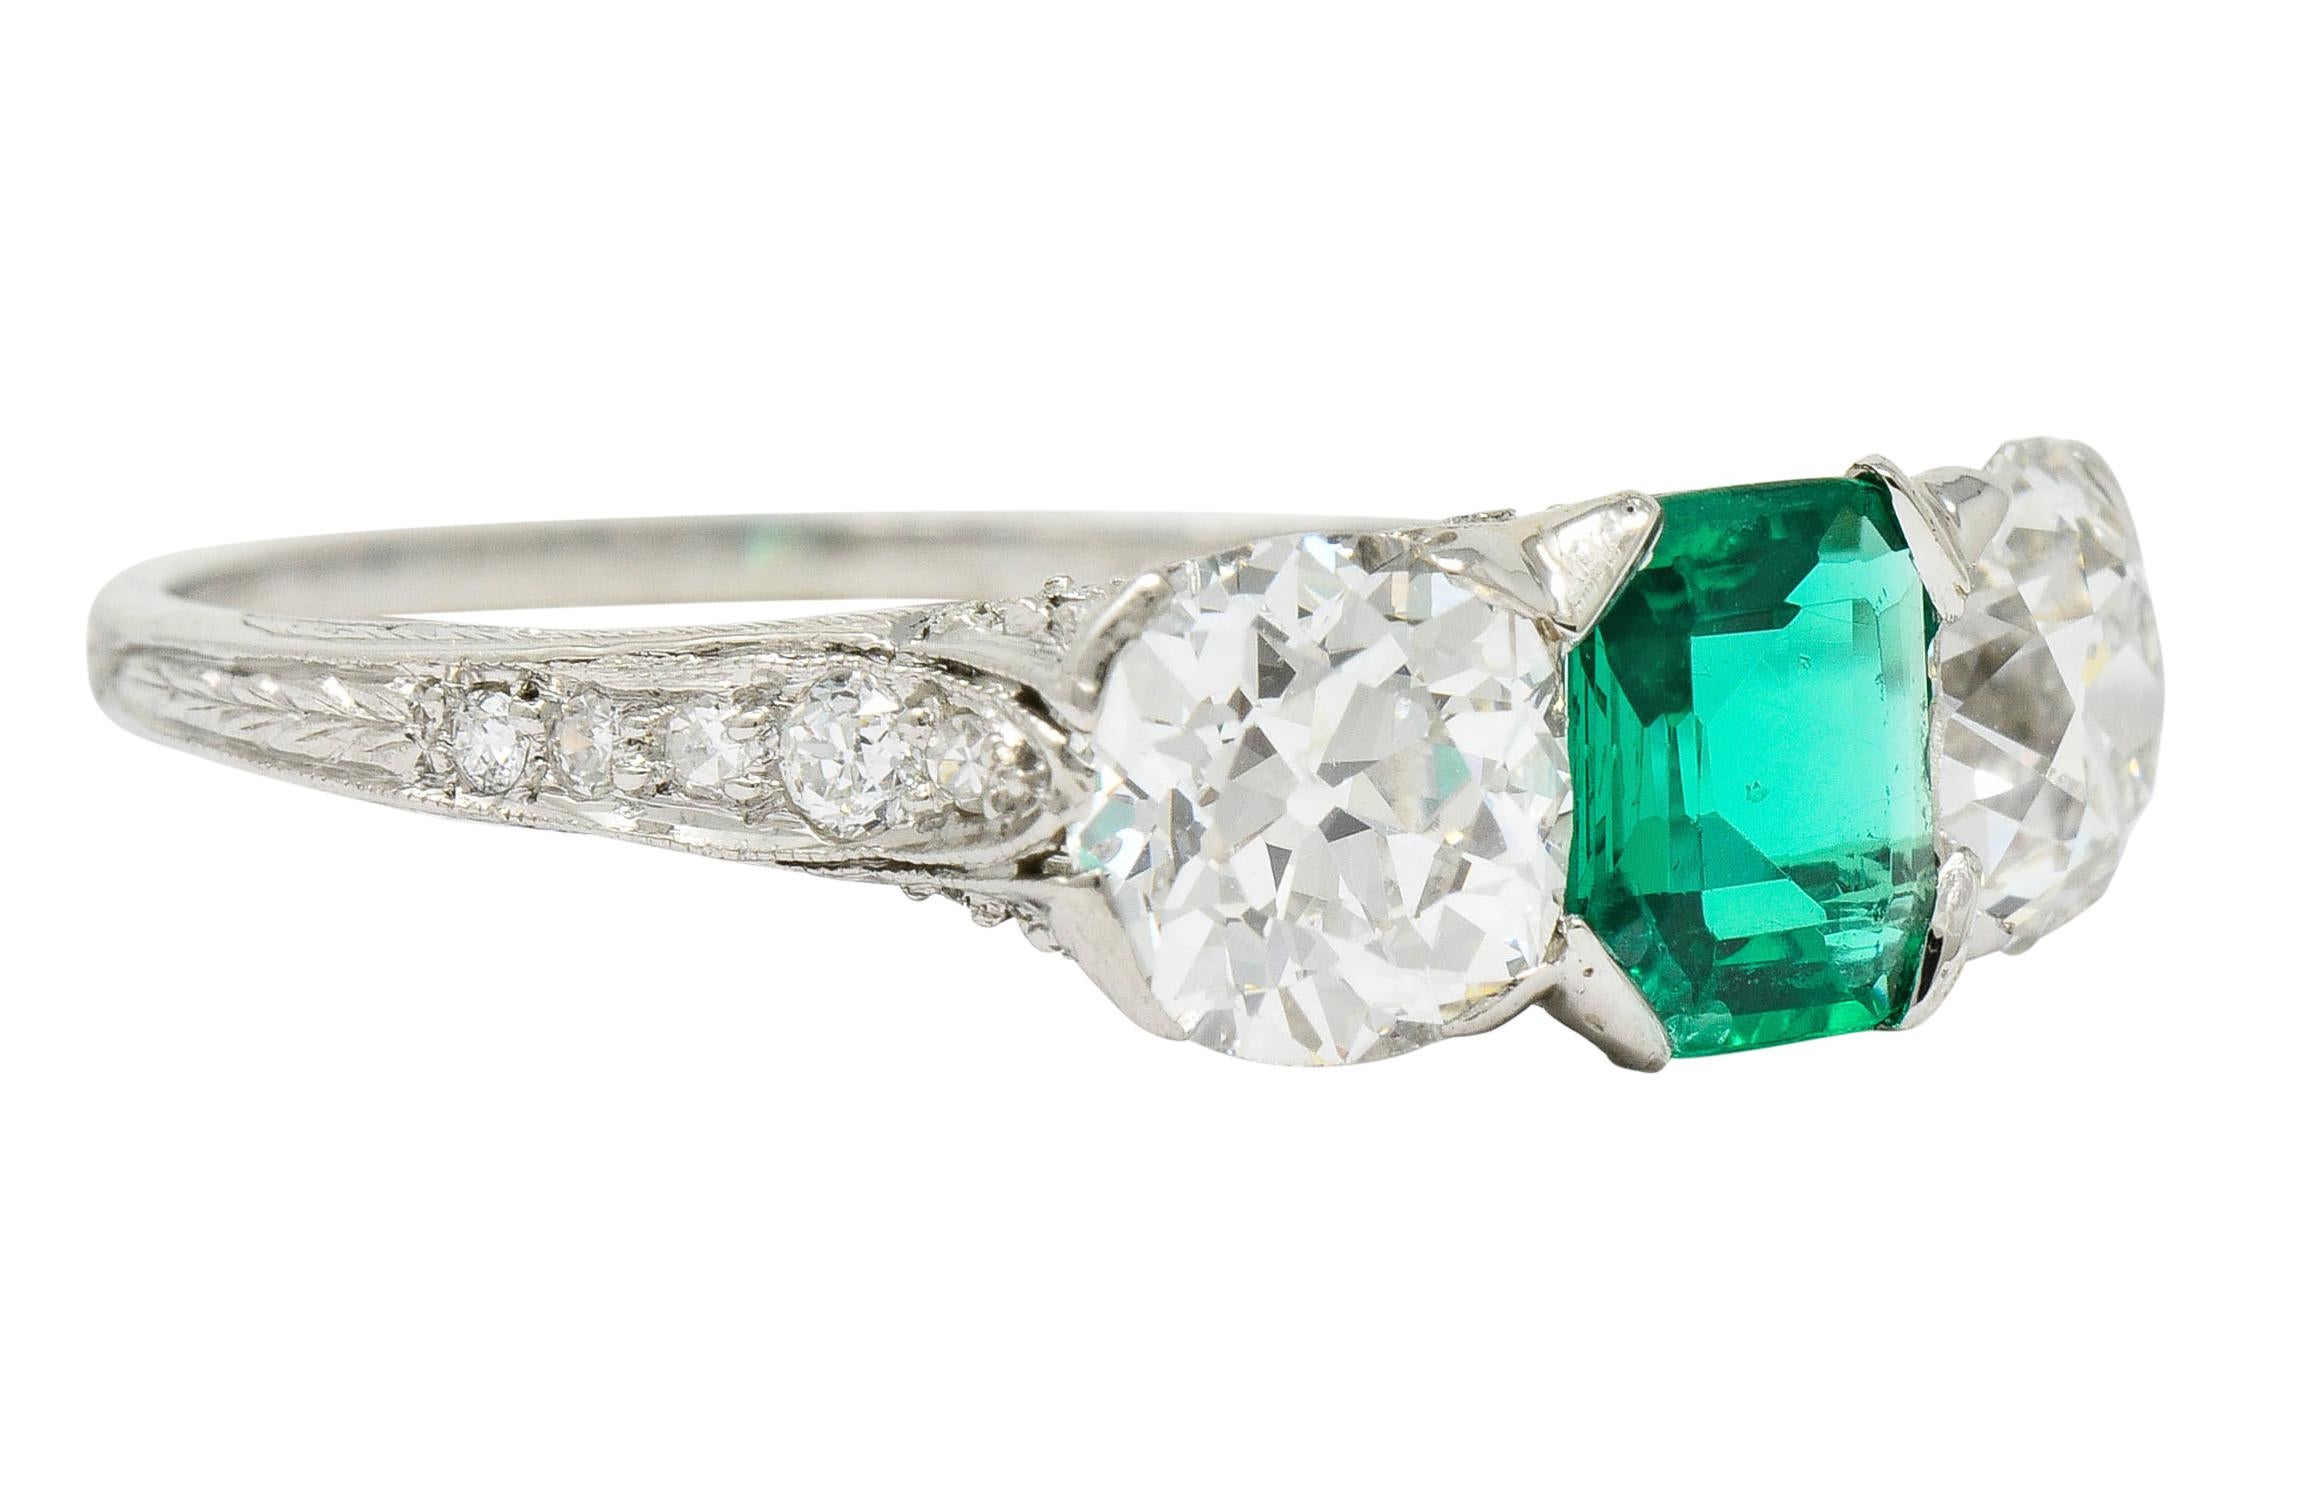 Centering an emerald cut emerald weighing approximately 0.62 carat, very transparent with a bright viridian color

Flanked by two old mine cut diamonds weighing in total approximately 1.74 carats, G/H color with VS clarity

With ornate gallery and